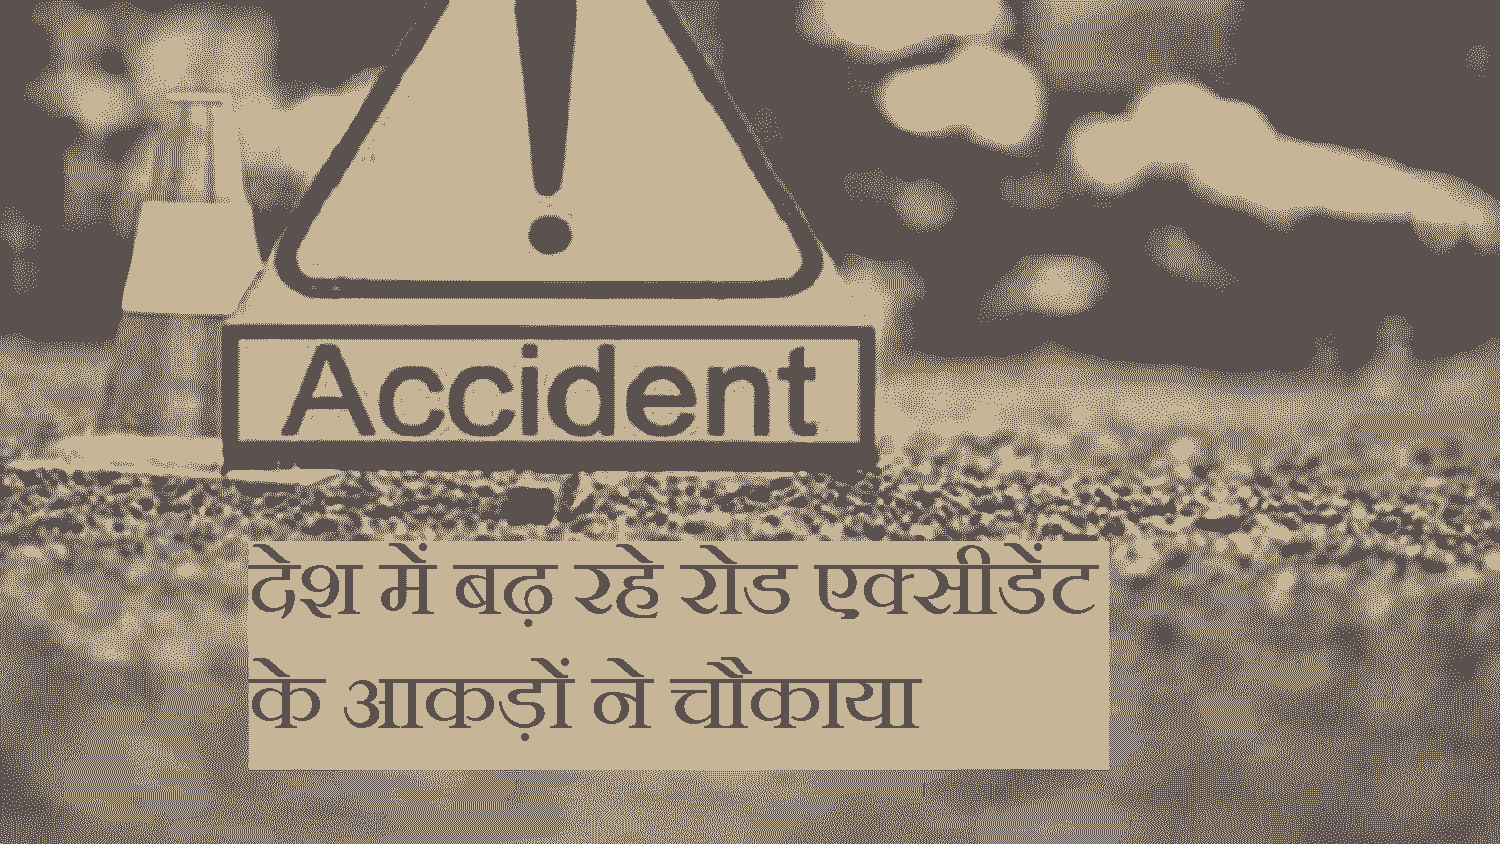 increasing figures of road accidents in the country shocked